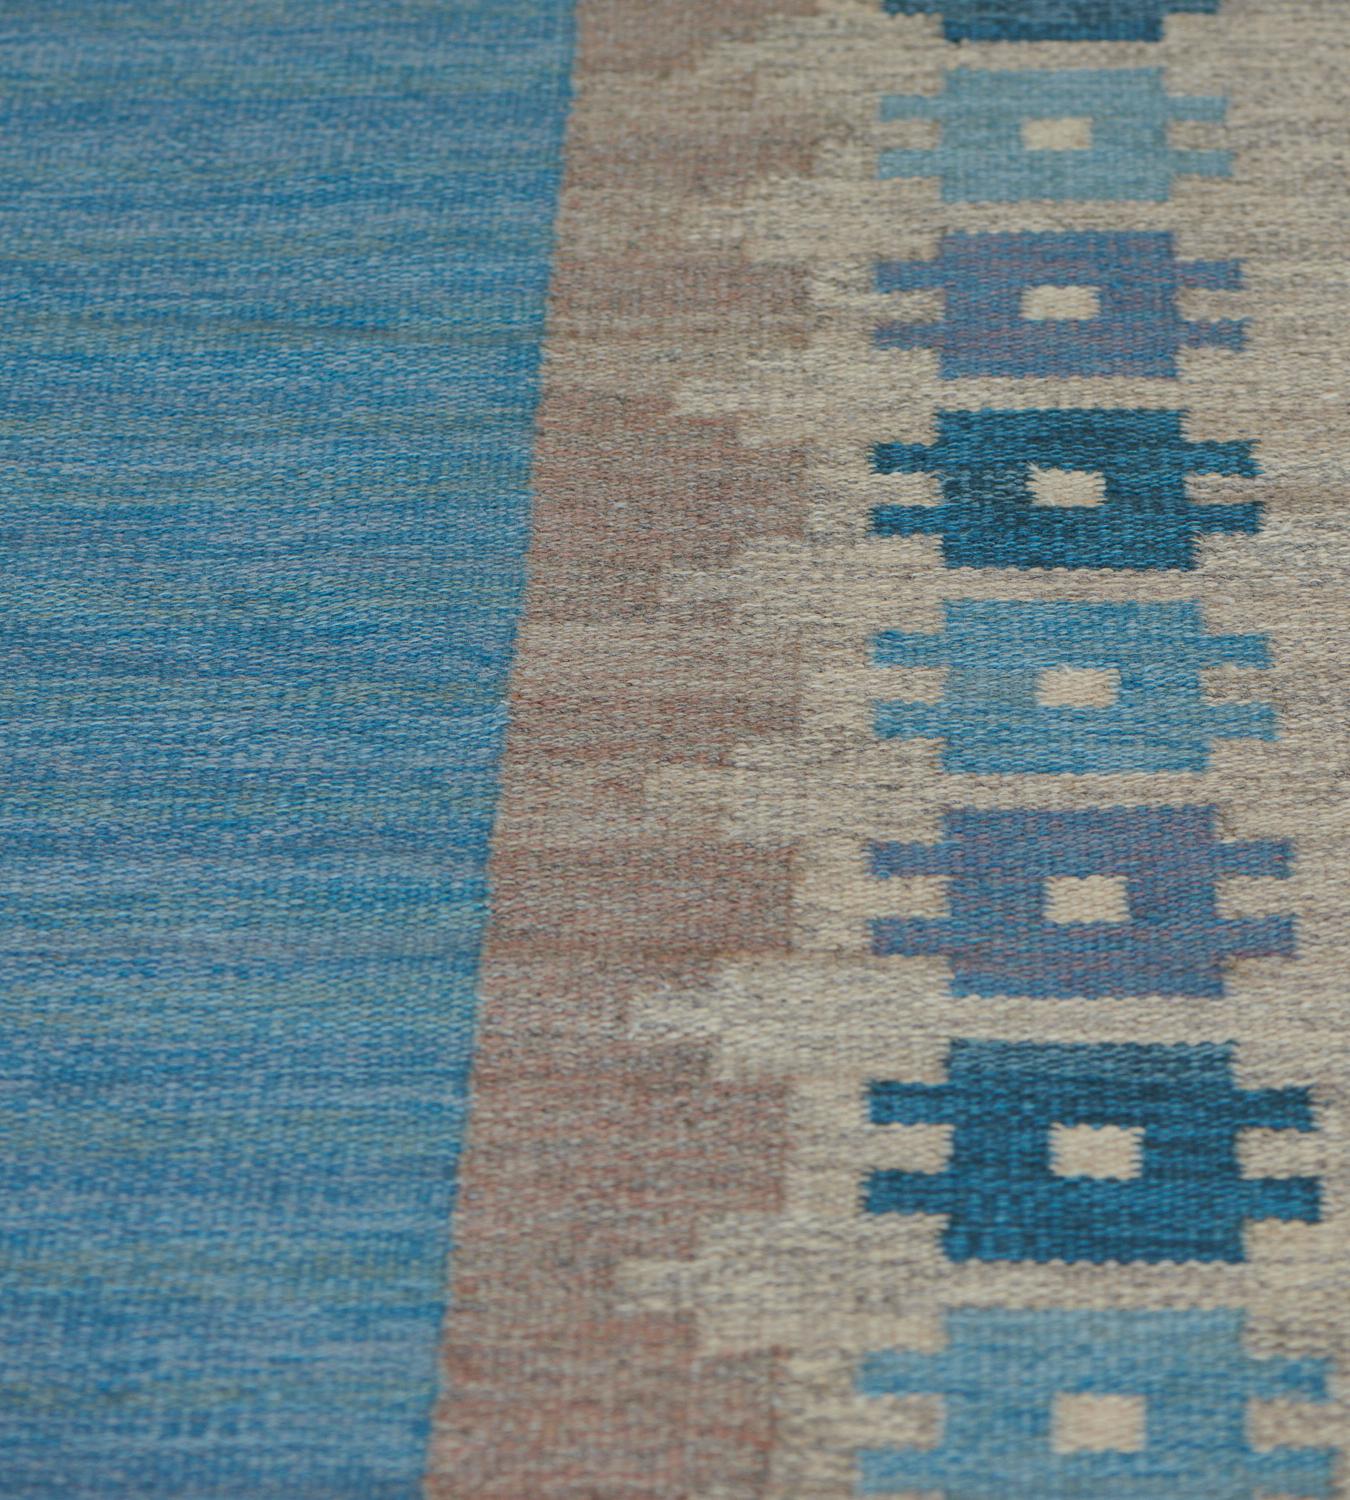 This antique Swedish rug features a plain shaded sky-blue field, in a broad border of shaded sandy-brown outward facing part stepped lozenges with a row of shaded blue bold square motifs issuing a pair of minor panels at each side, signature initial